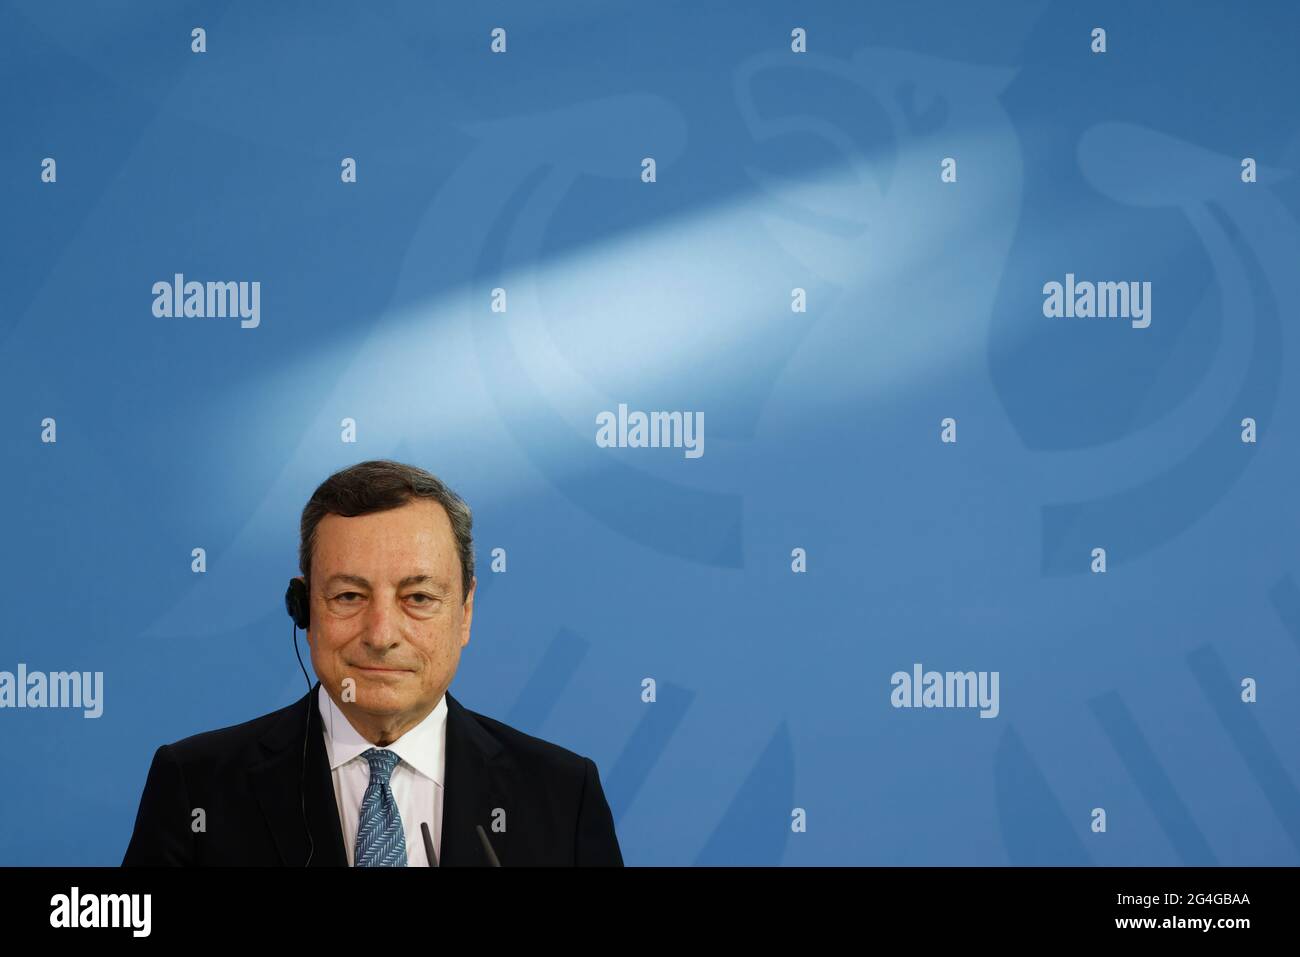 Berlin, Germany. 21st June, 2021. Mario Draghi, Prime Minister of Italy, holds a joint press conference with Chancellor Merkel at the Federal Chancellery. Draghi is in Berlin for his inaugural visit. Credit: Odd Andersen/AFP-Pool/dpa/Alamy Live News Stock Photo